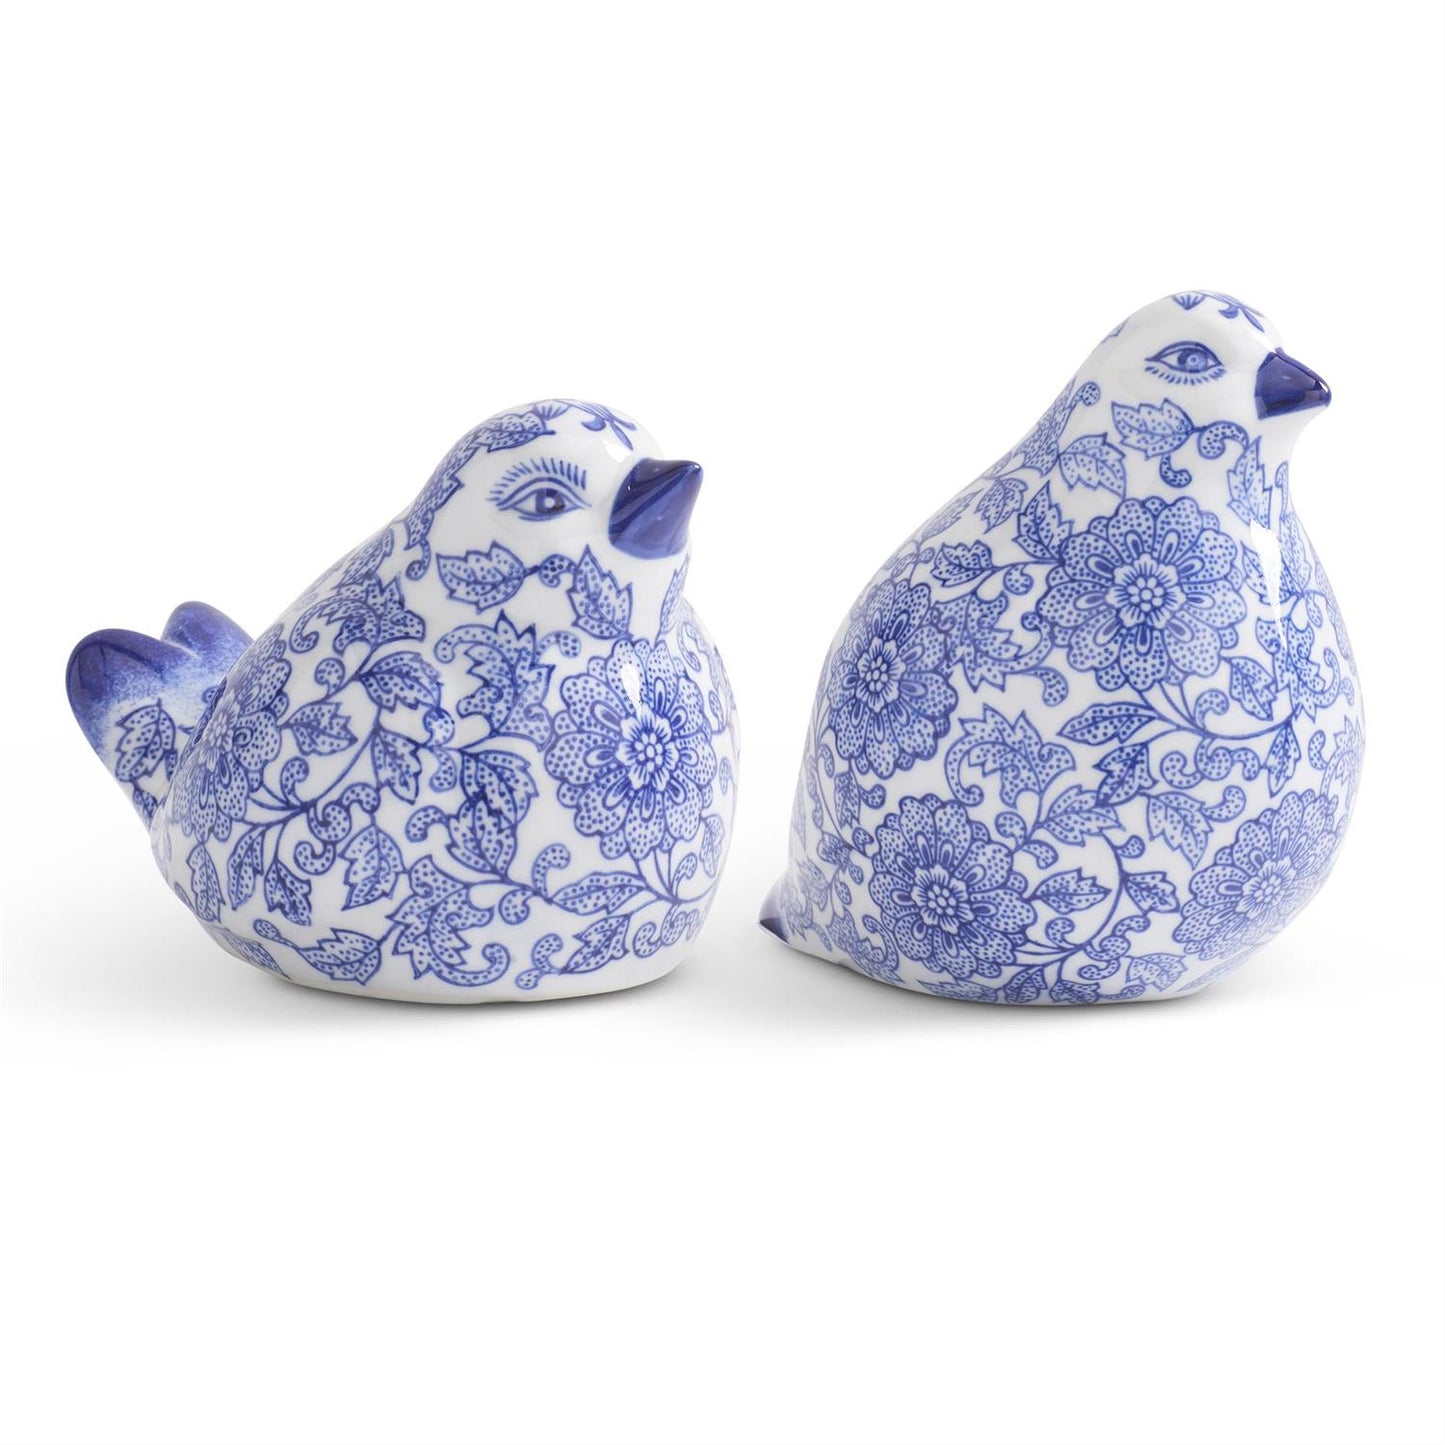 2 styles of blue and white patterned birds on a white background.